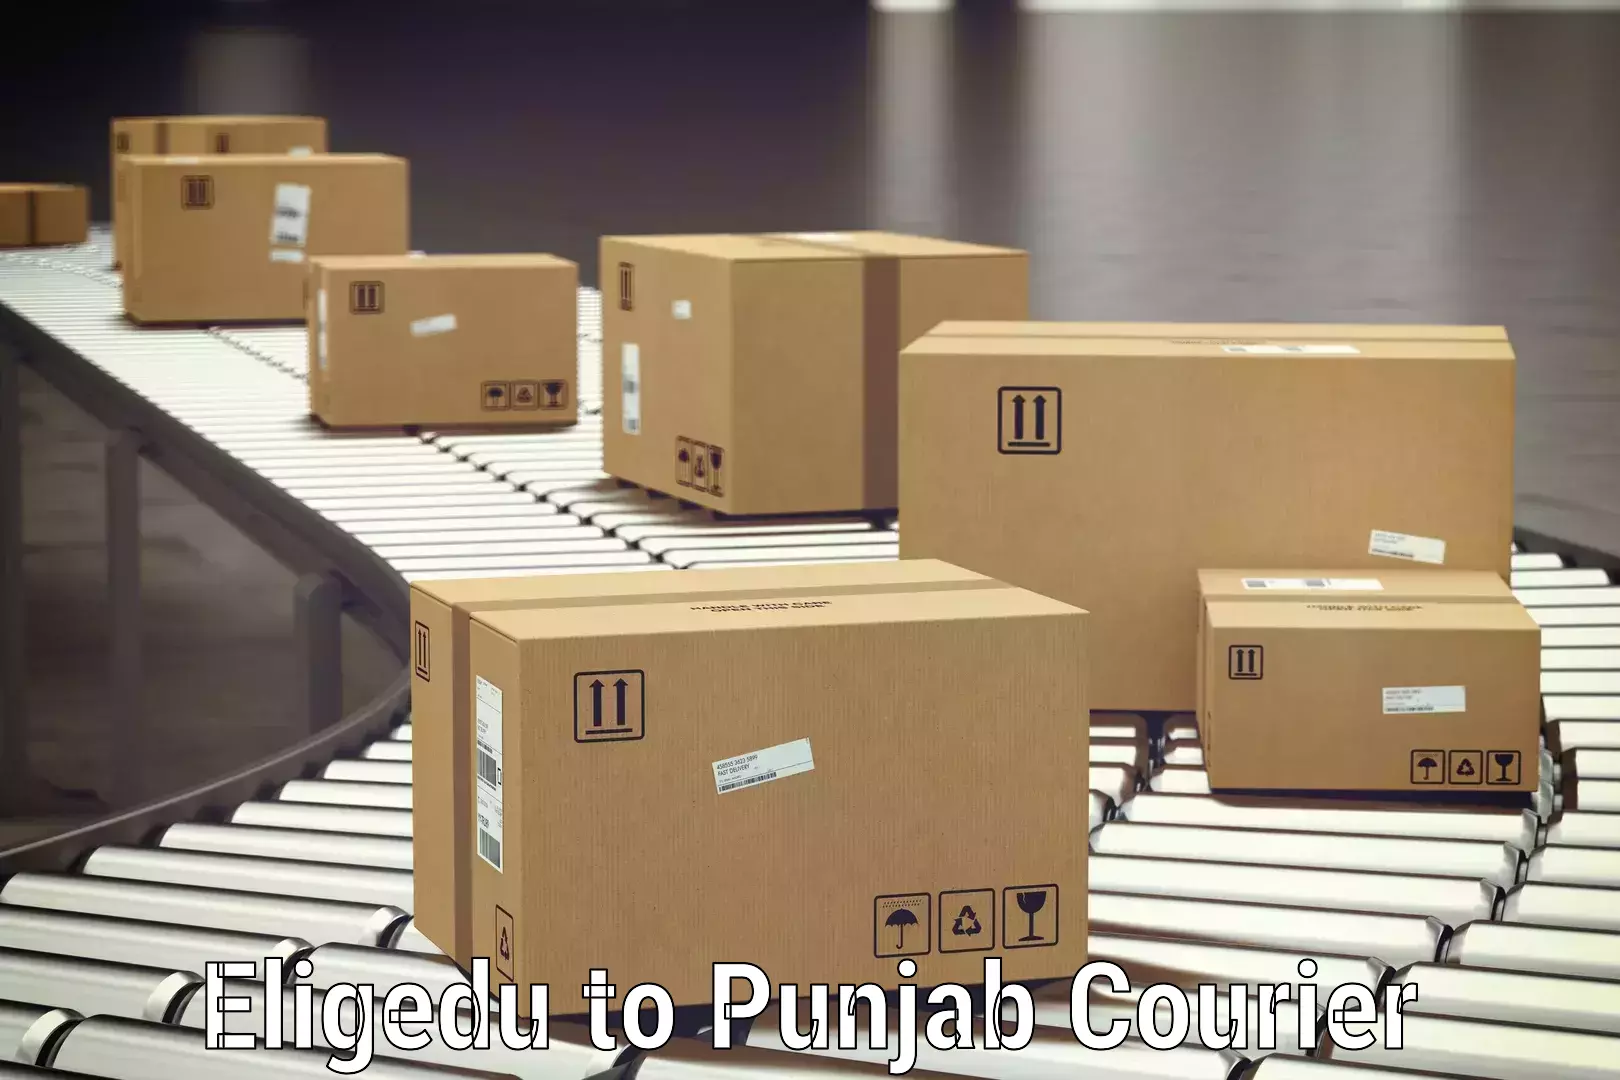 Luggage storage and delivery Eligedu to Punjab